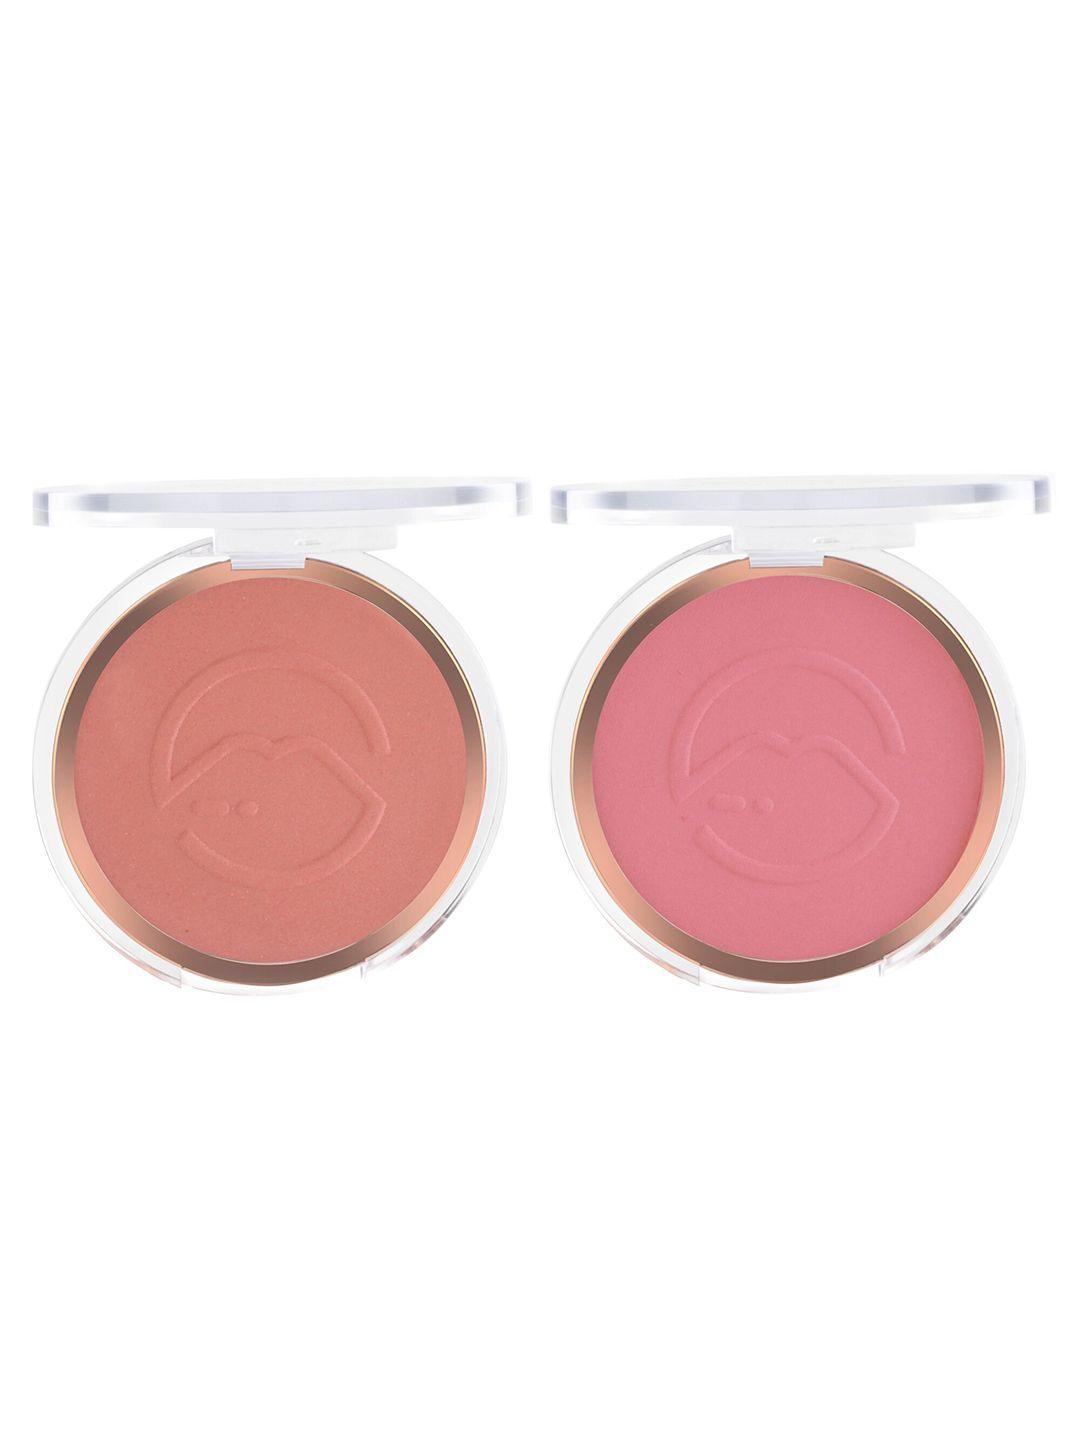 mars-set-of-2-flush-of-love-highly-pigmented-matte-face-blusher---shade-01-&-04